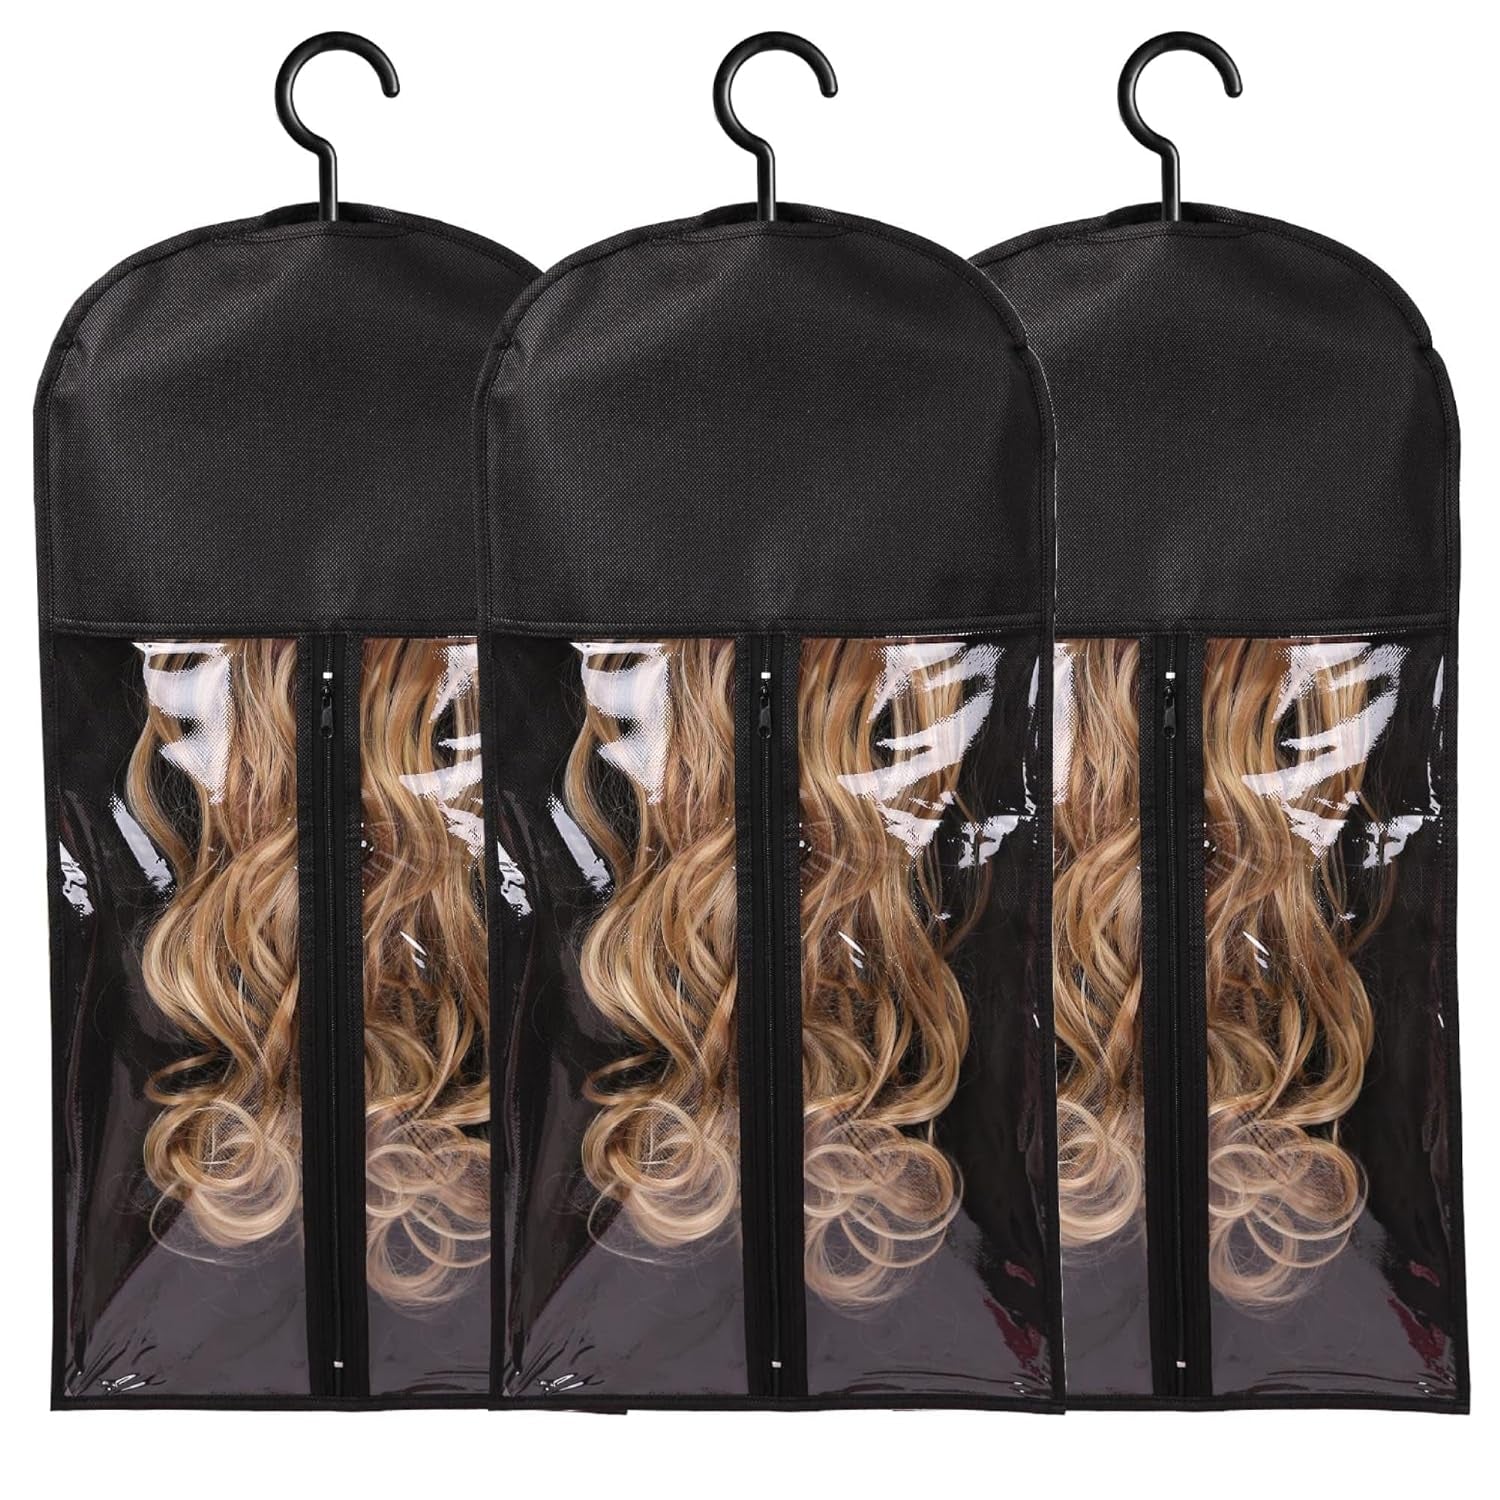 3PCS Wig Hanger Hair Extension Holder Wig Storage for Multiple Wigs Bags Storage with Hanger Wig Holder Dust-Proof Hair Extension Storage with Hook Hair Extensions, Wigs & Accessories (Black)